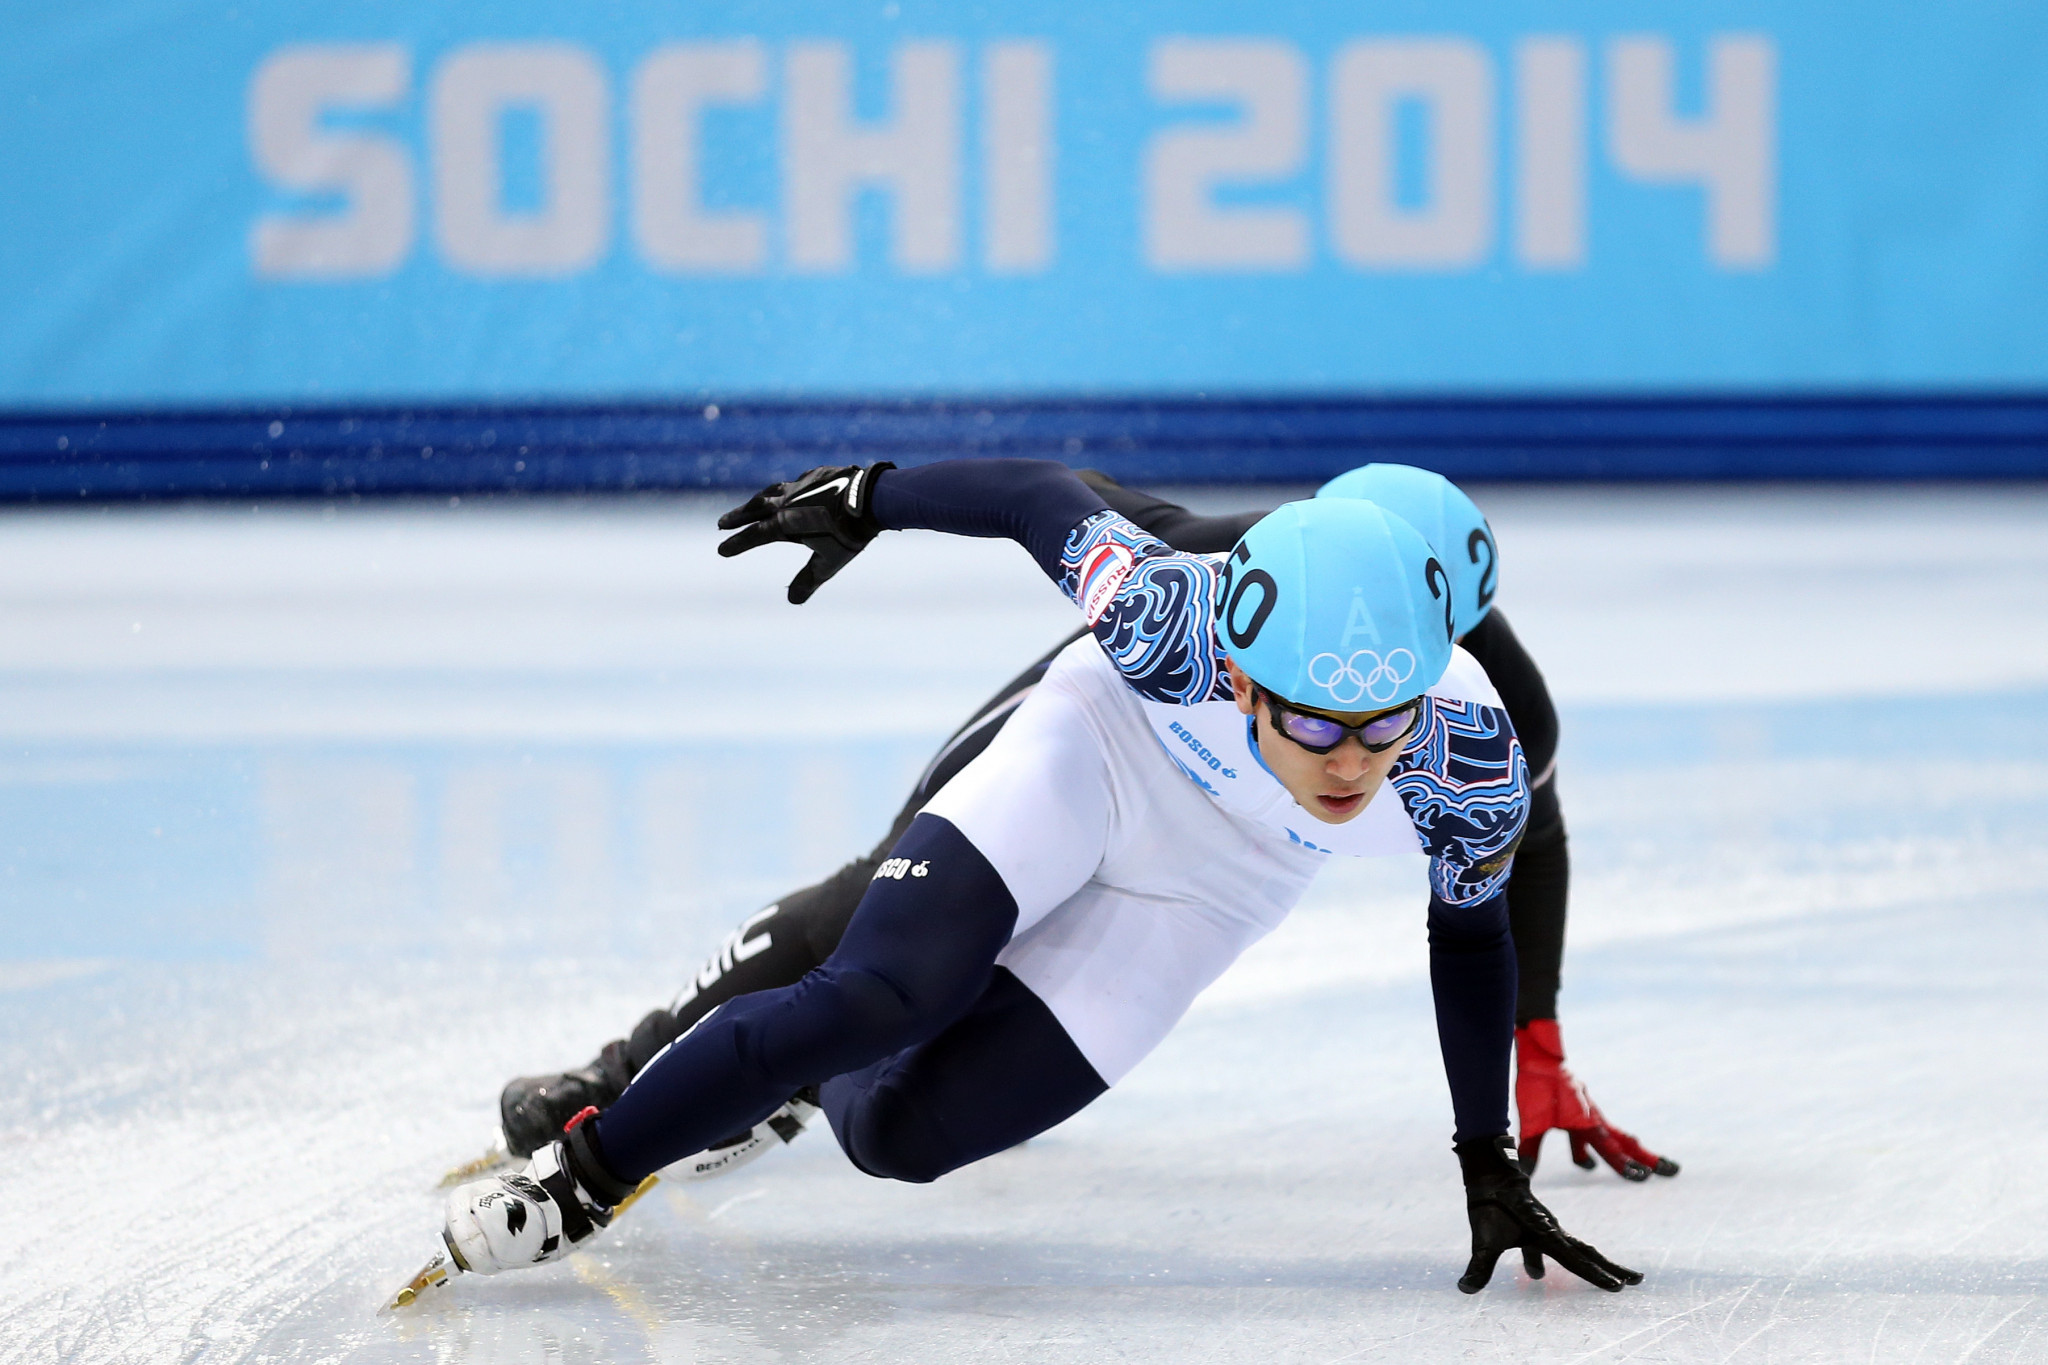 Viktor Ahn switched from South Korea to Russia in time for the 2014 Winter Olympics in Sochi, where he won four medals, including three gold, but was banned from Pyeongchang 2018 ©Getty Images